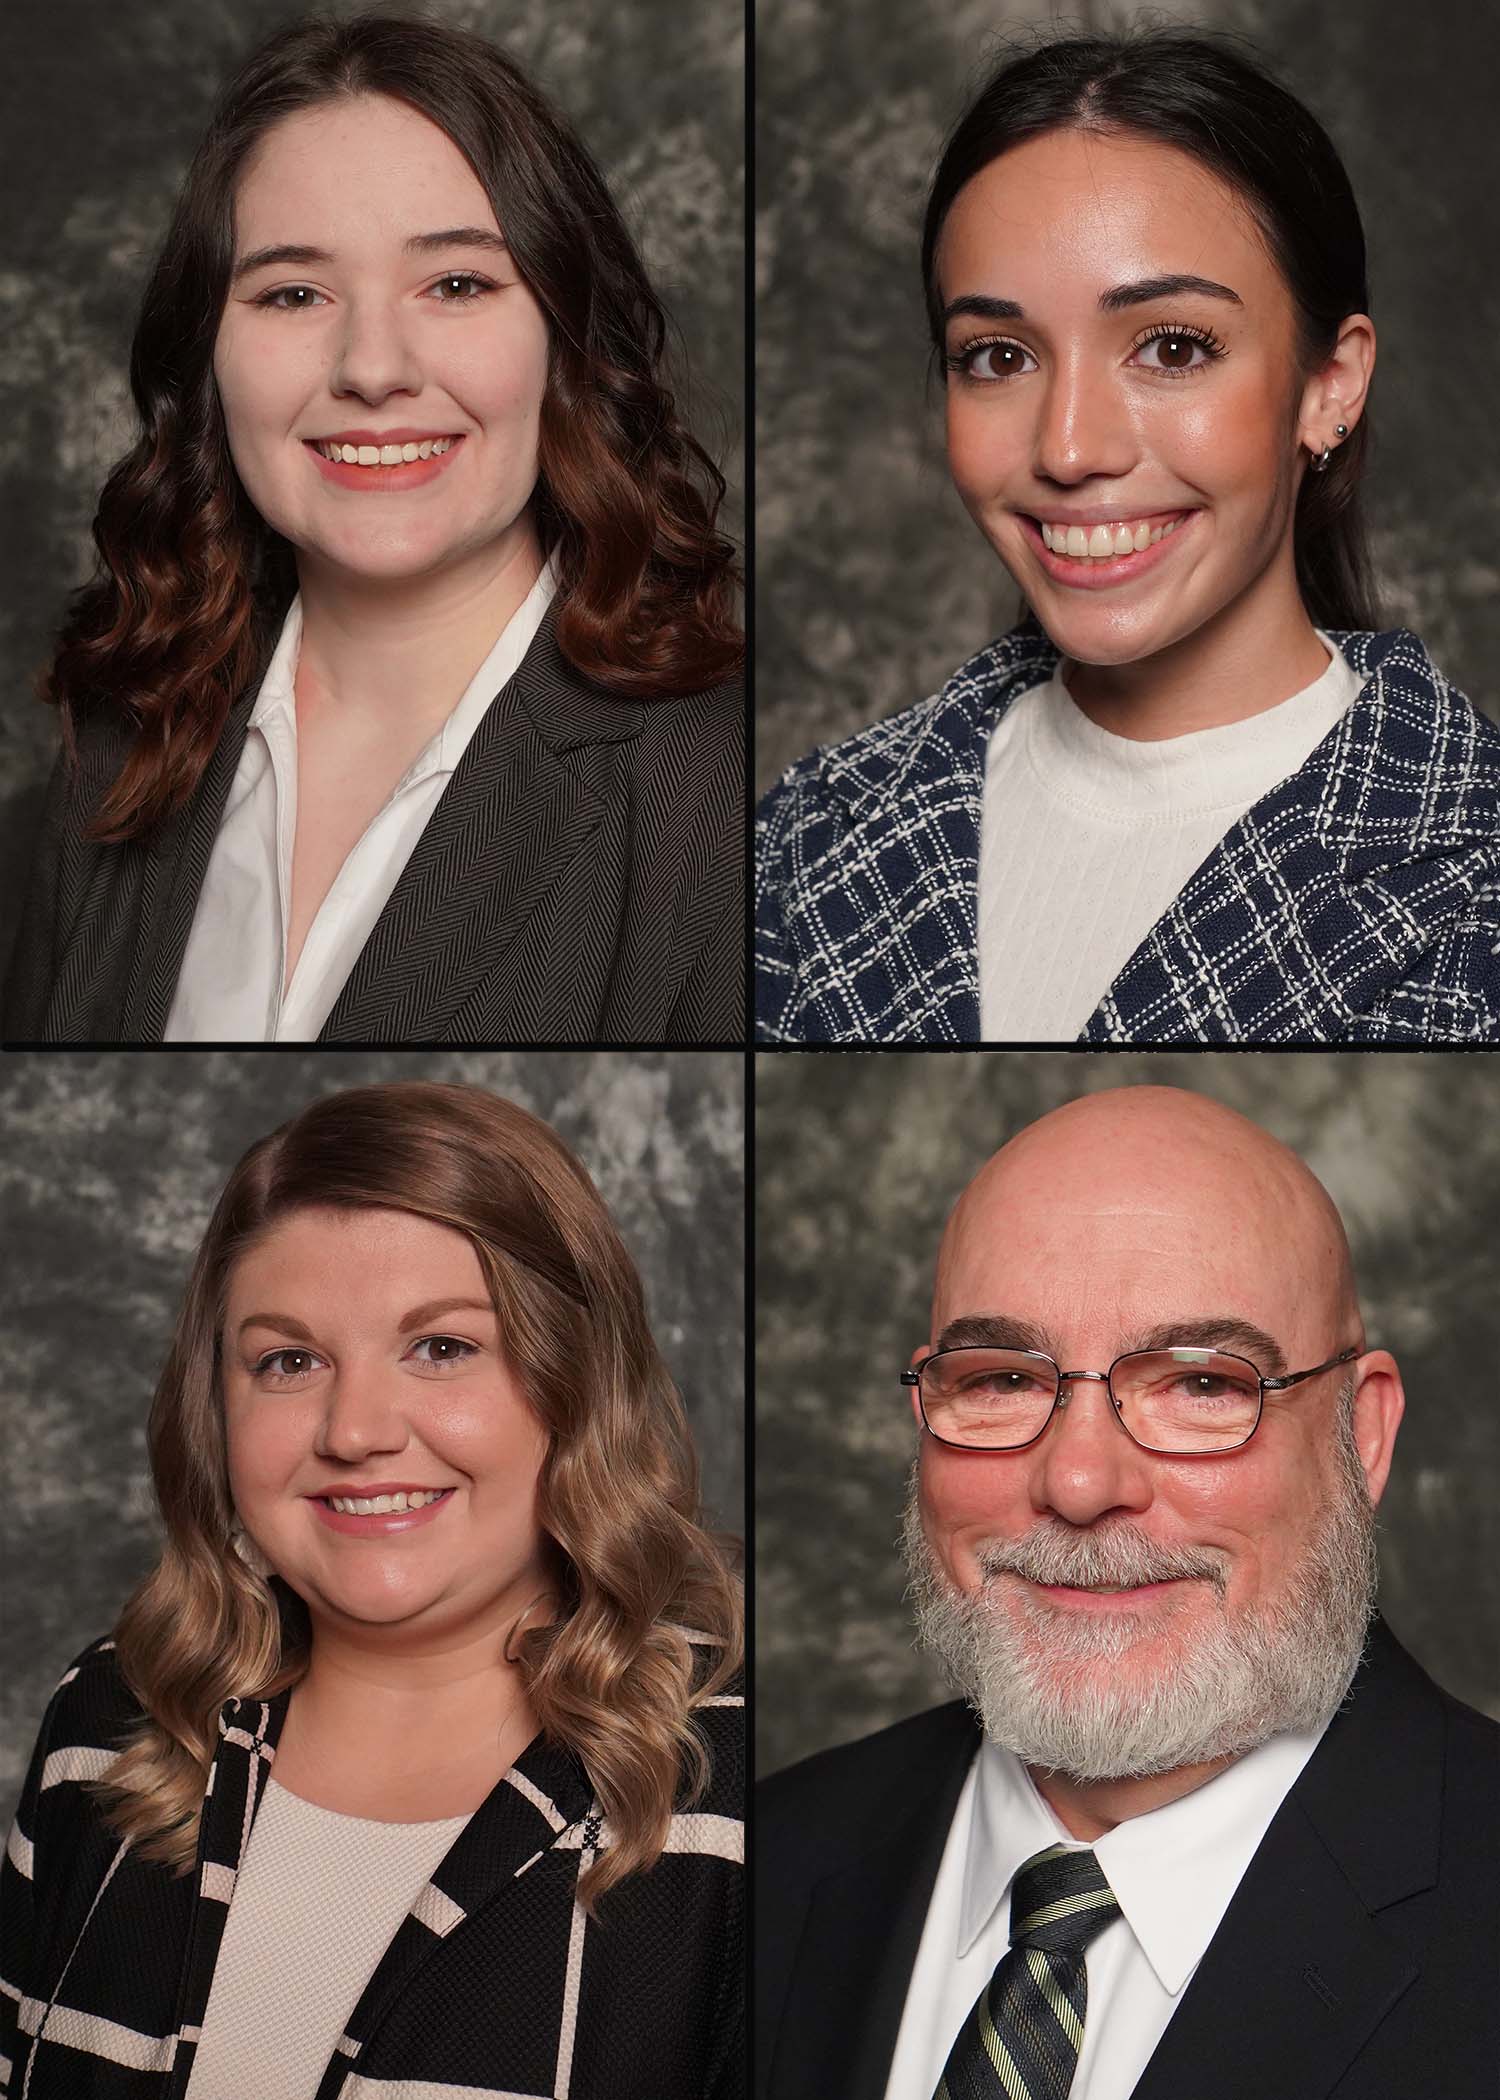 The four GNTC students selected as semi-finalists for the GOAL award are (top row, left to right) Allison Adams and Jadison Holbert (bottom row, left to right) Ashley Norton and William Robert Rutledge.